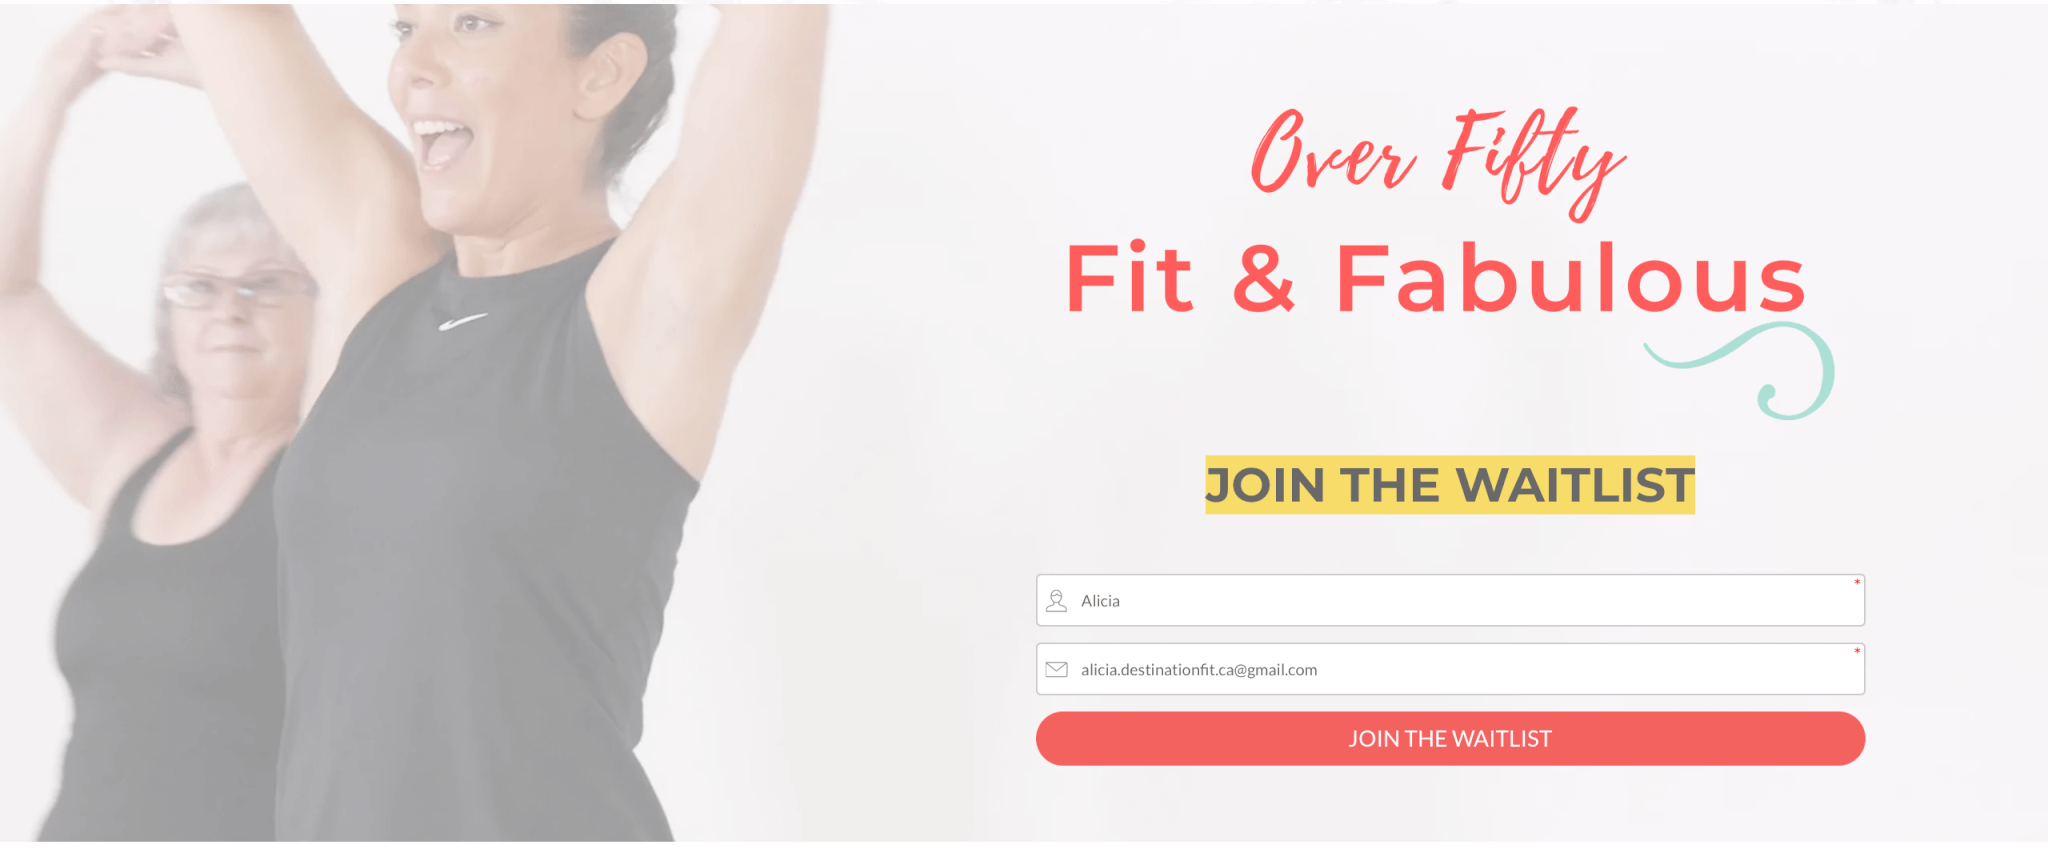 Link to waitlist sign up for program Overy Fifty Fit & Fabulous